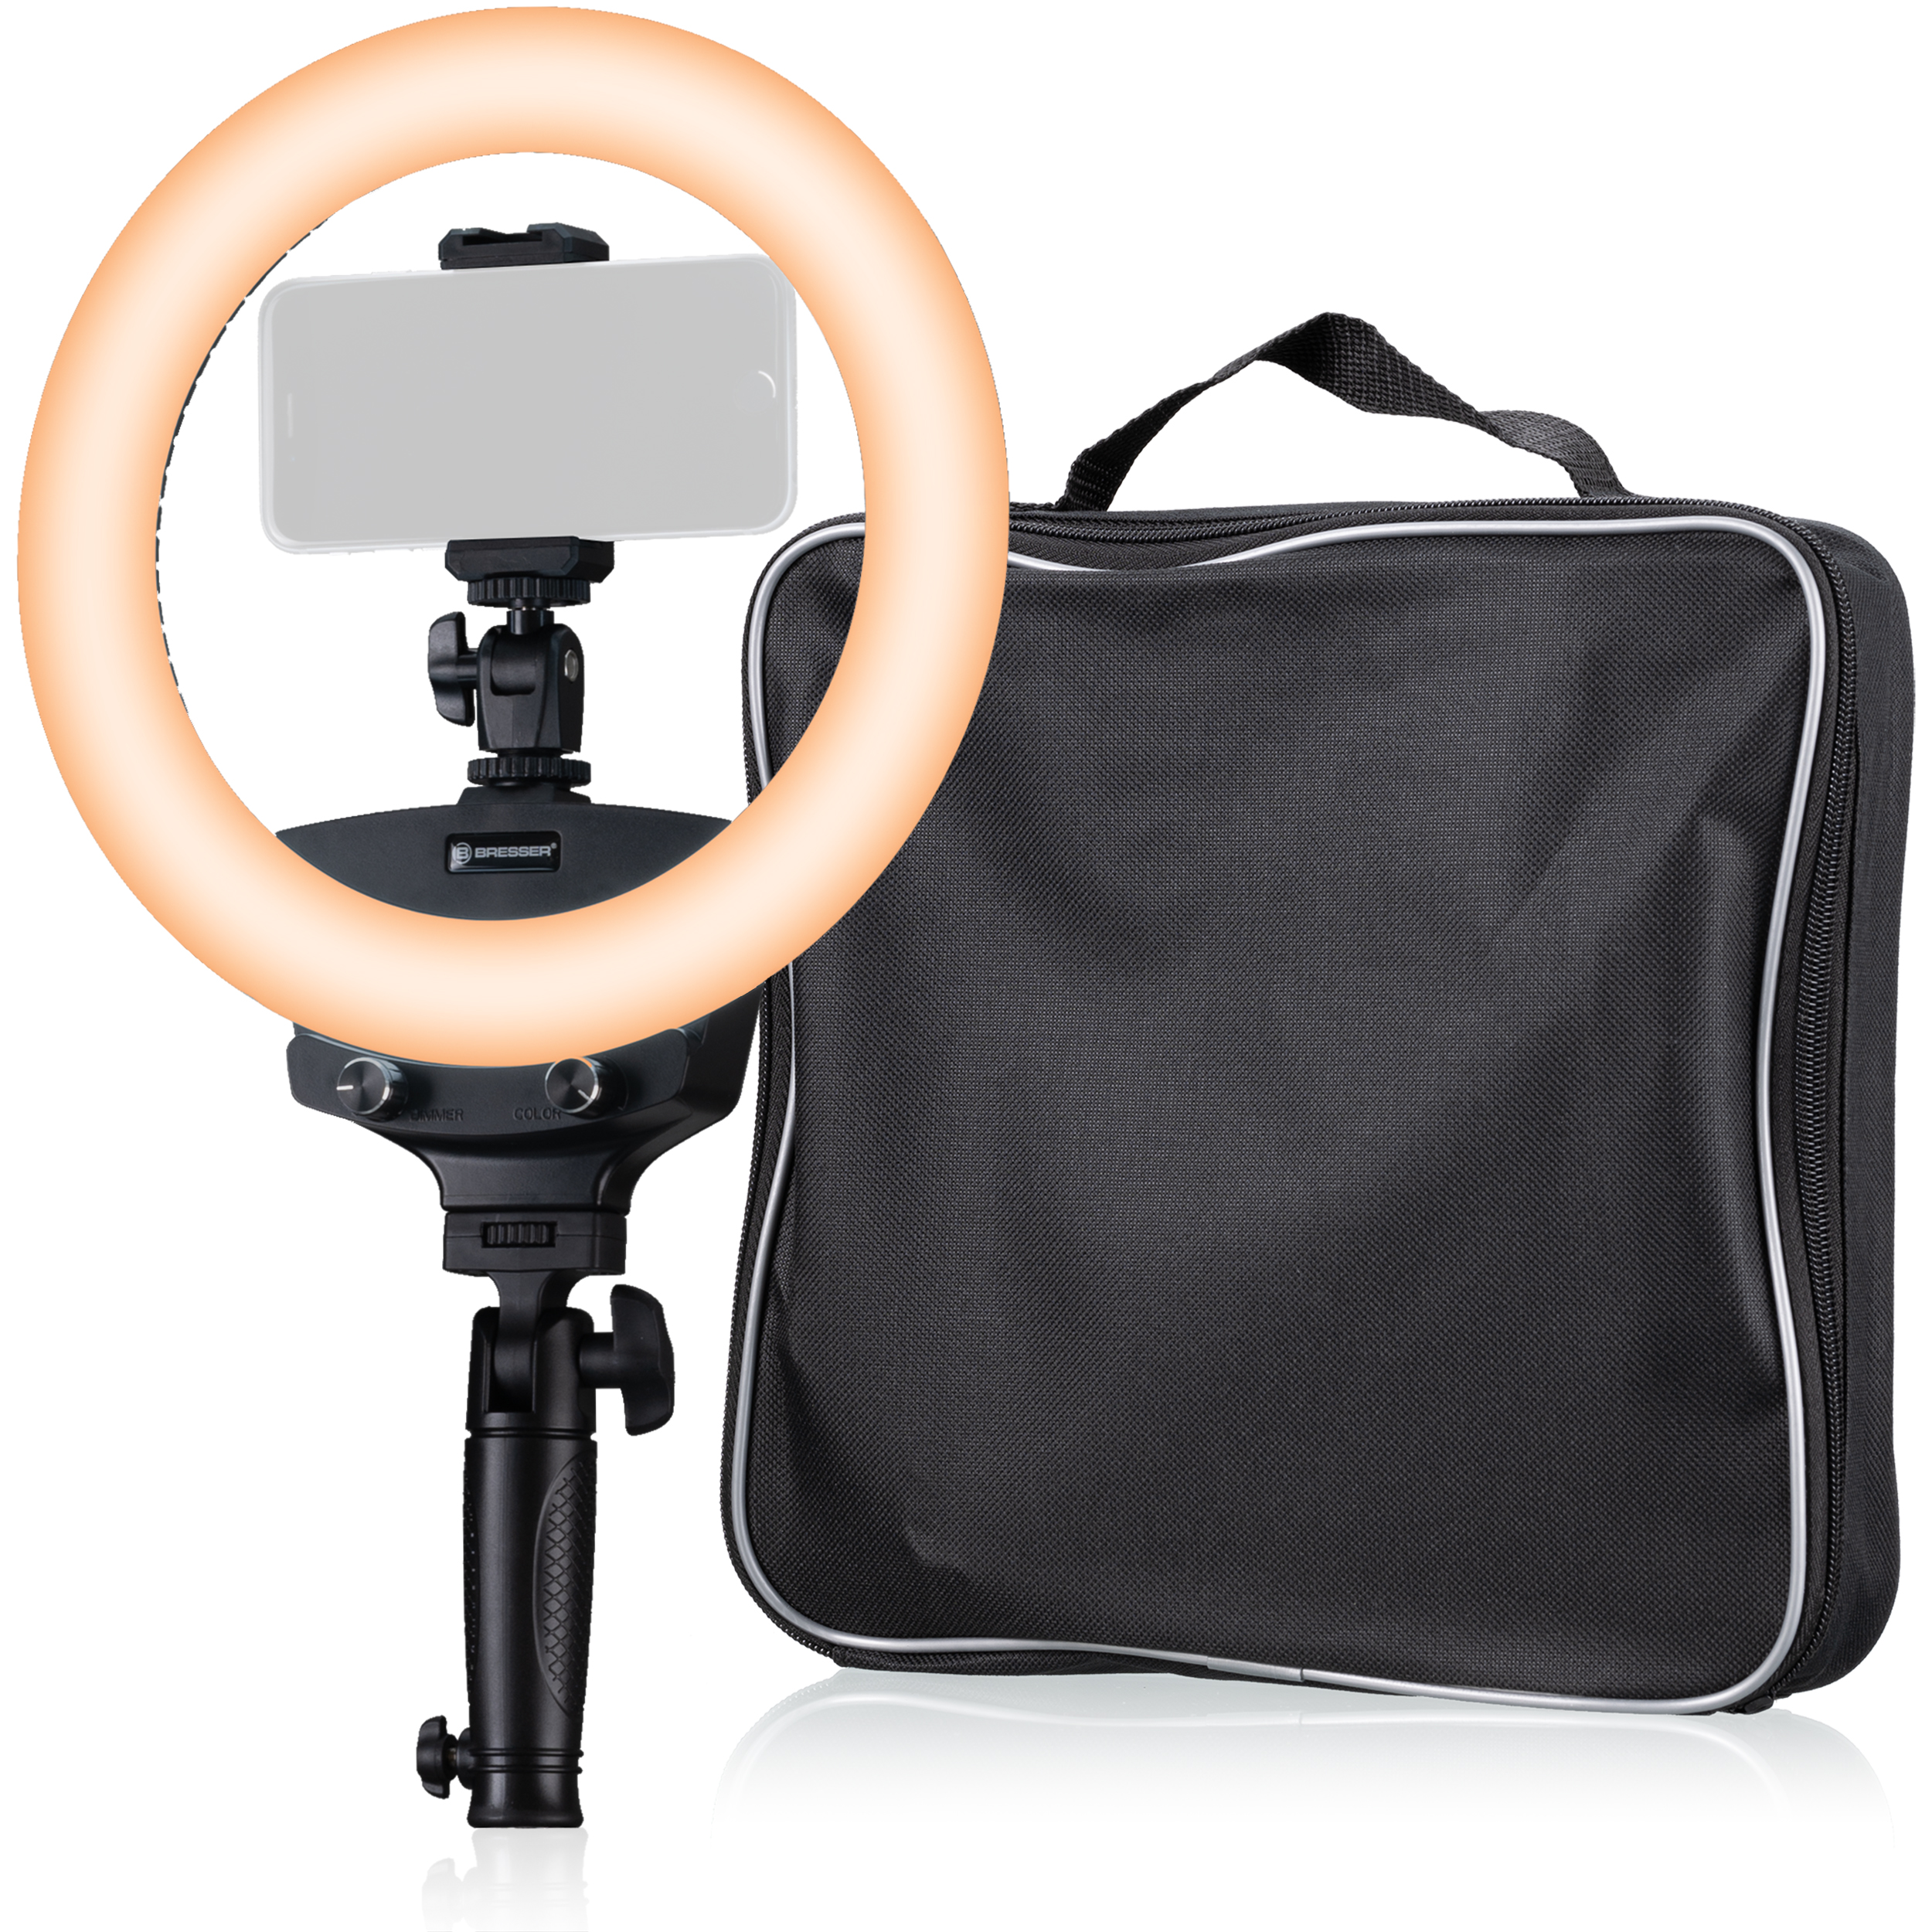 BRESSER BR-22B Bi-colour LED ring light with handle and tripod connection